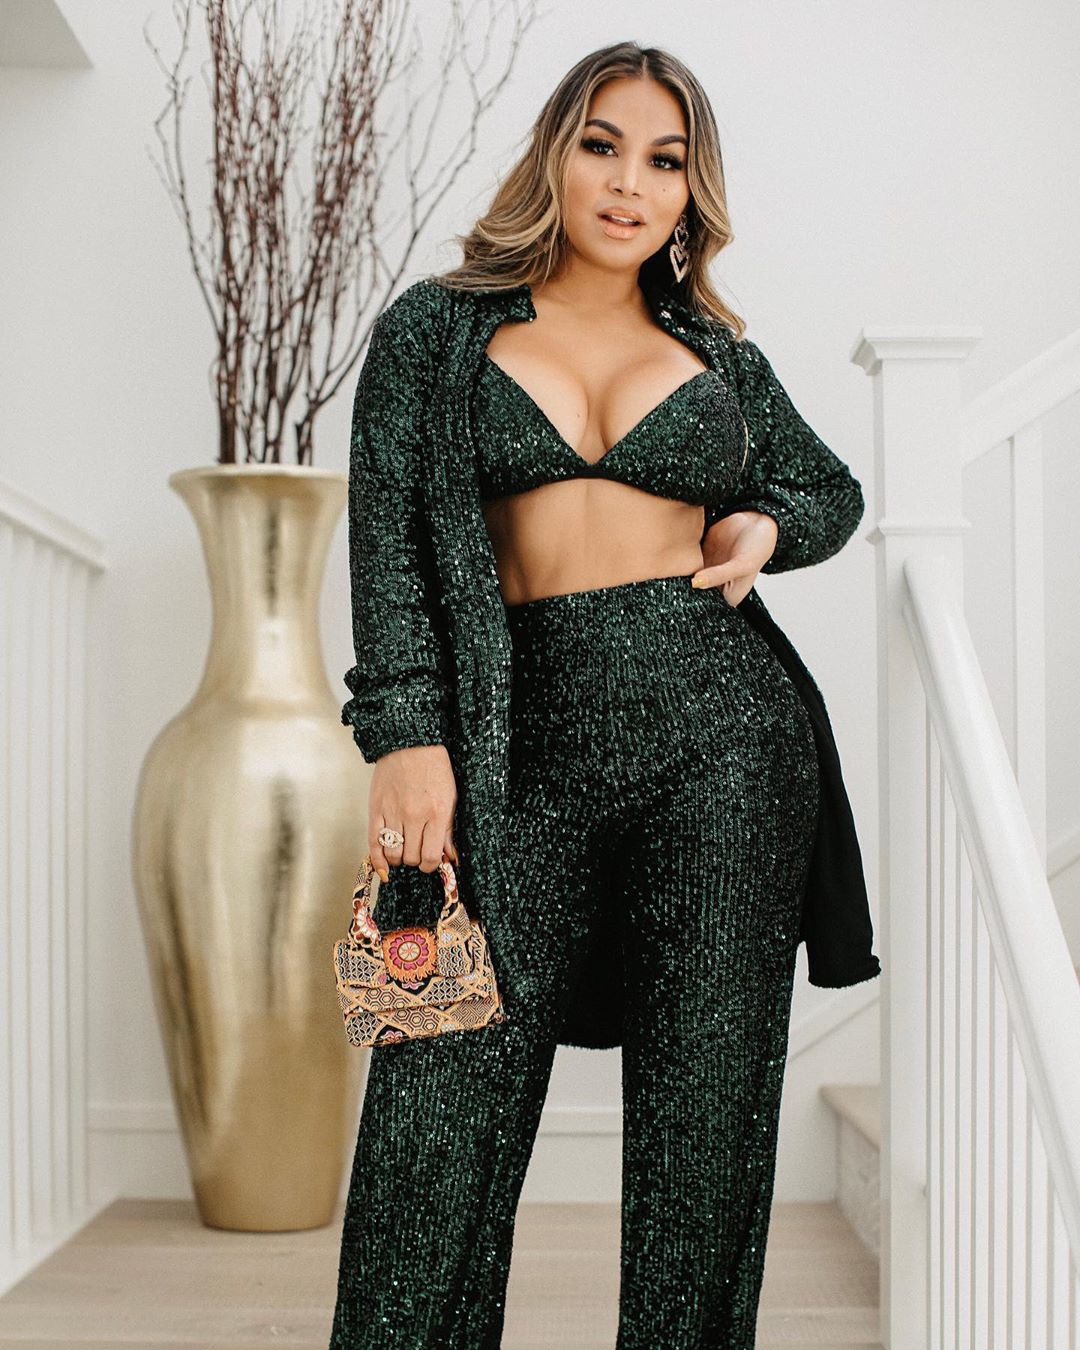 Dolly Castro dress trousers, pajamas dresses ideas: Beige Trench Coat,  Dolly Castro Instagram  